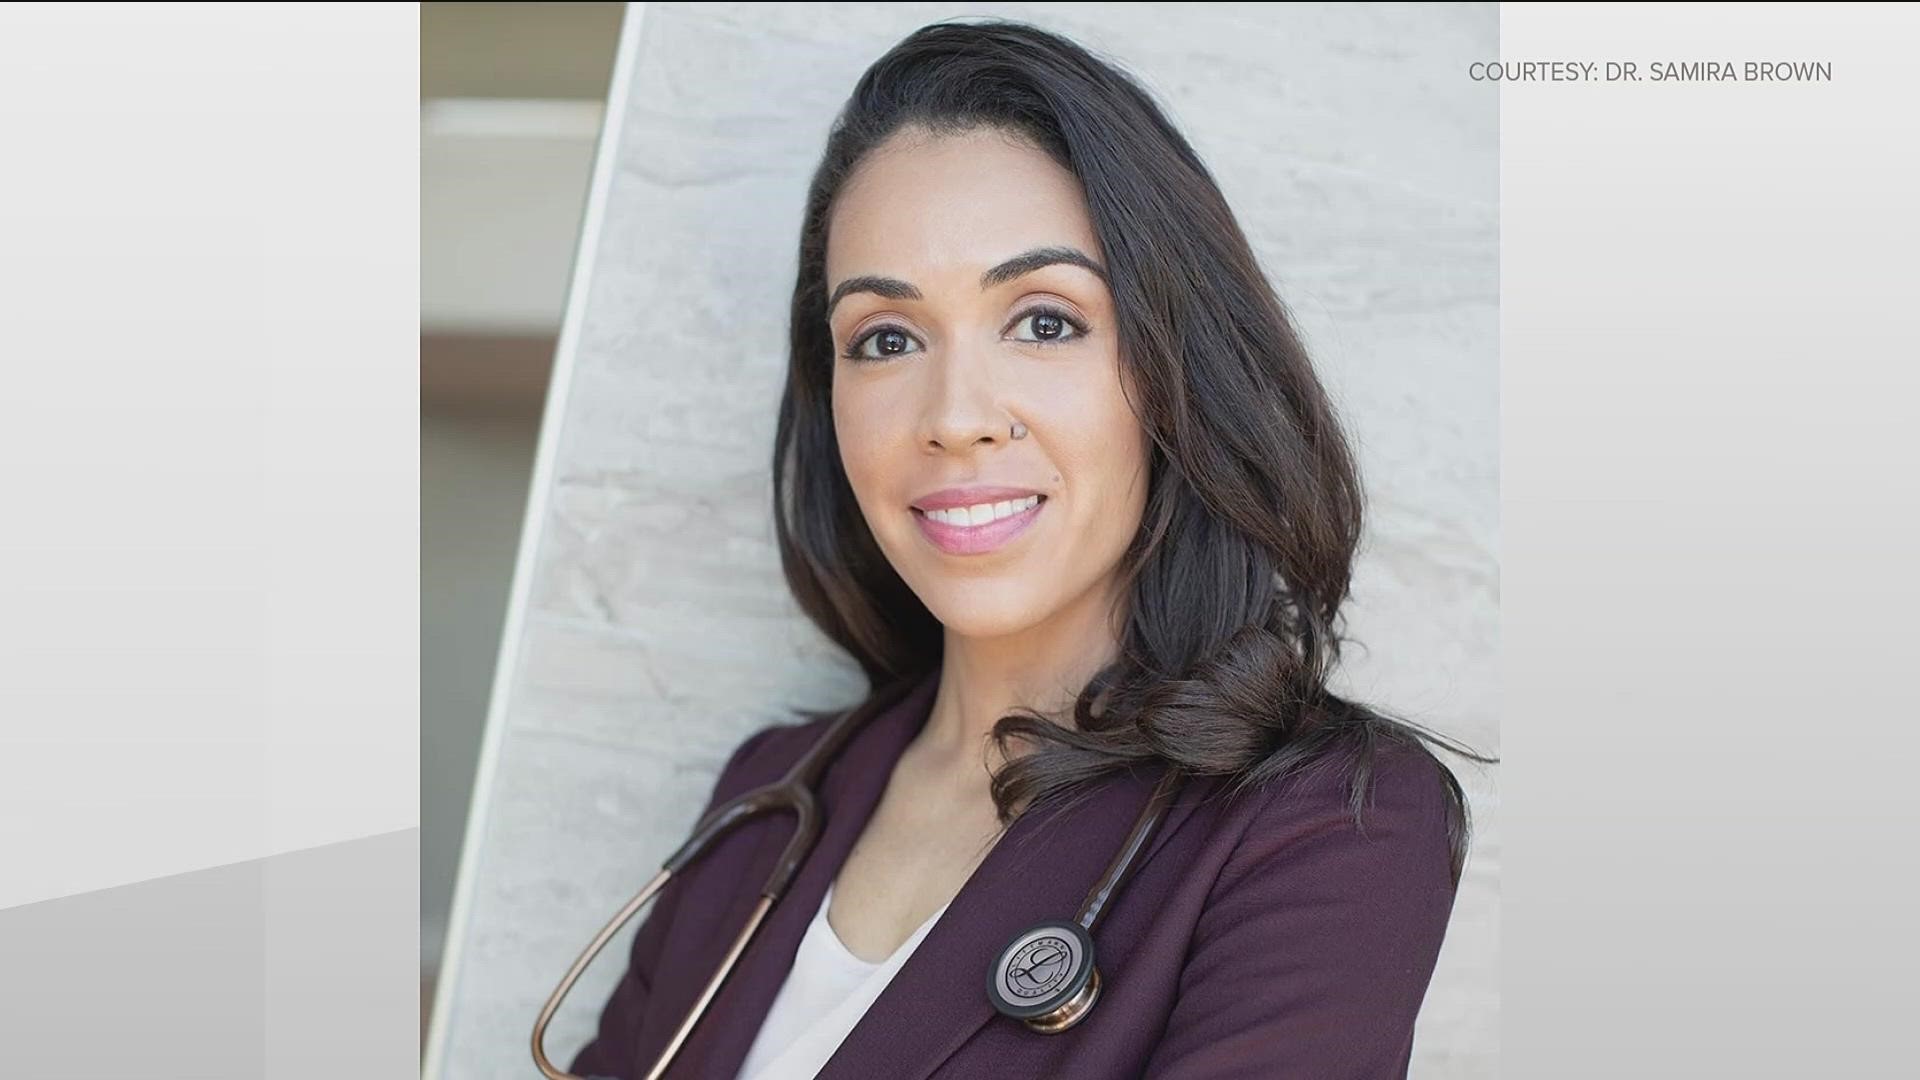 She is one of six Black leaders recognized for their role in the national "Stay Well Community Health Initiative."